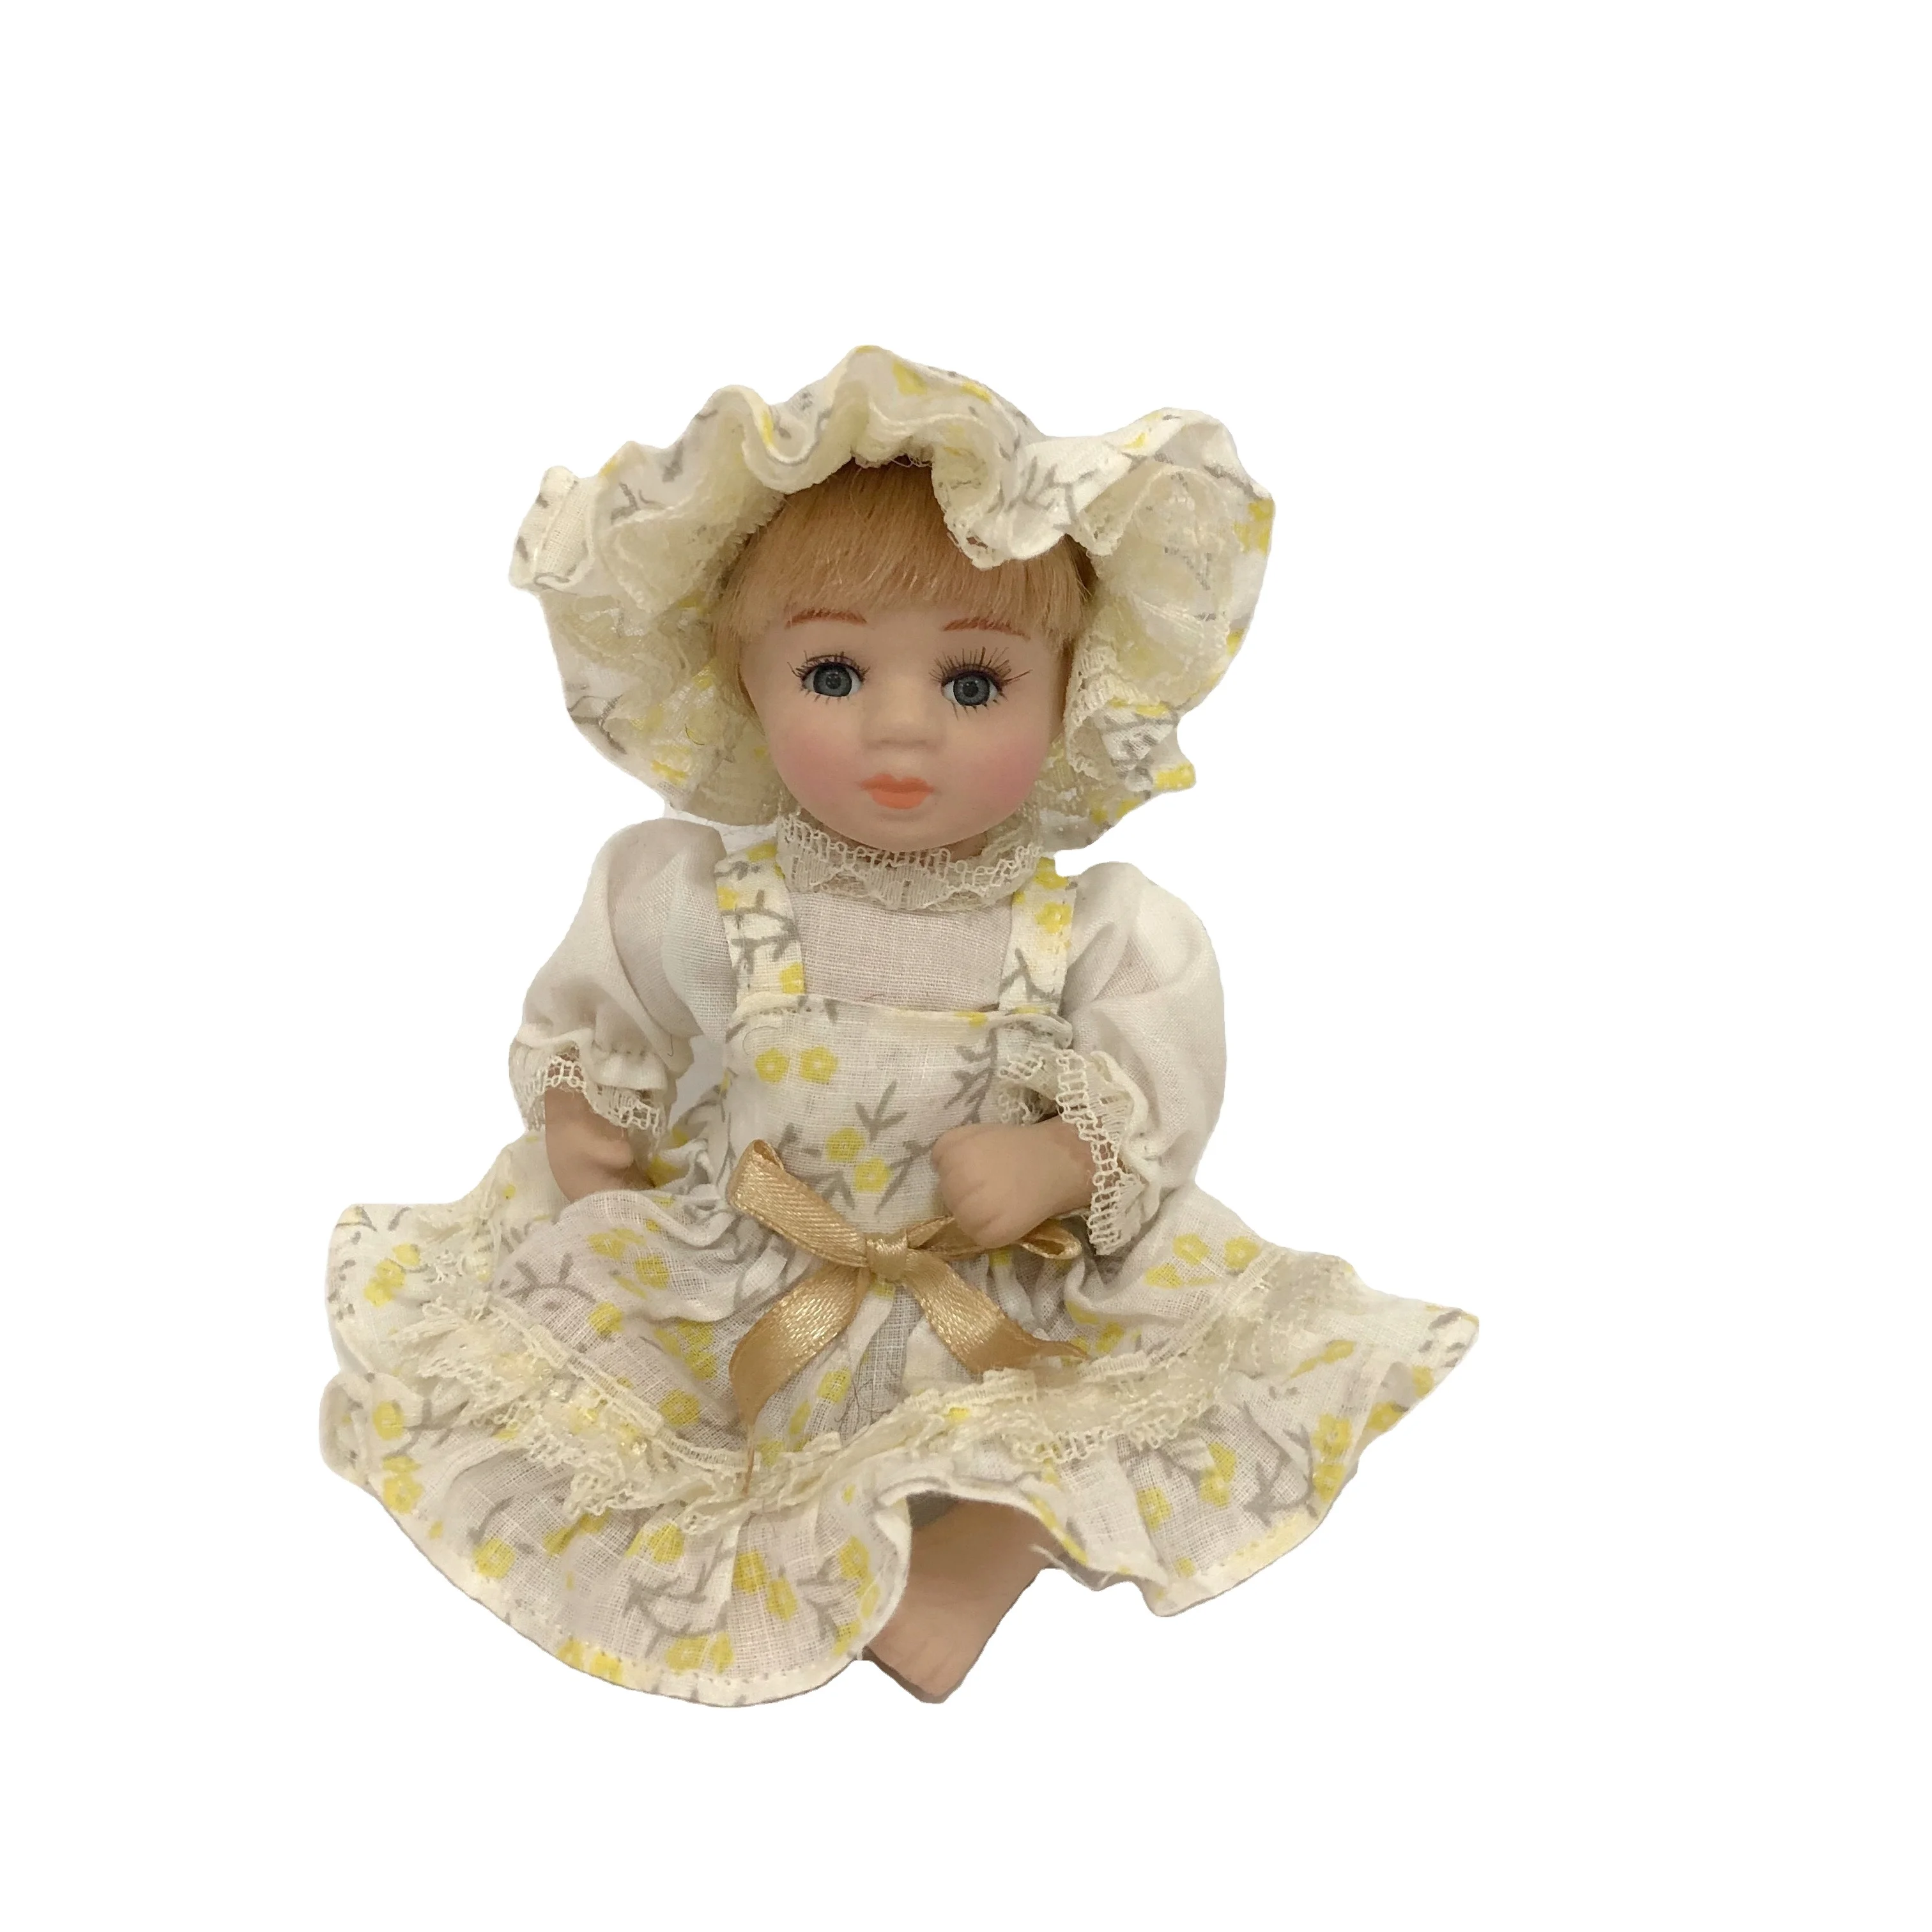 Rural style Porcelain dolls with nice cloth